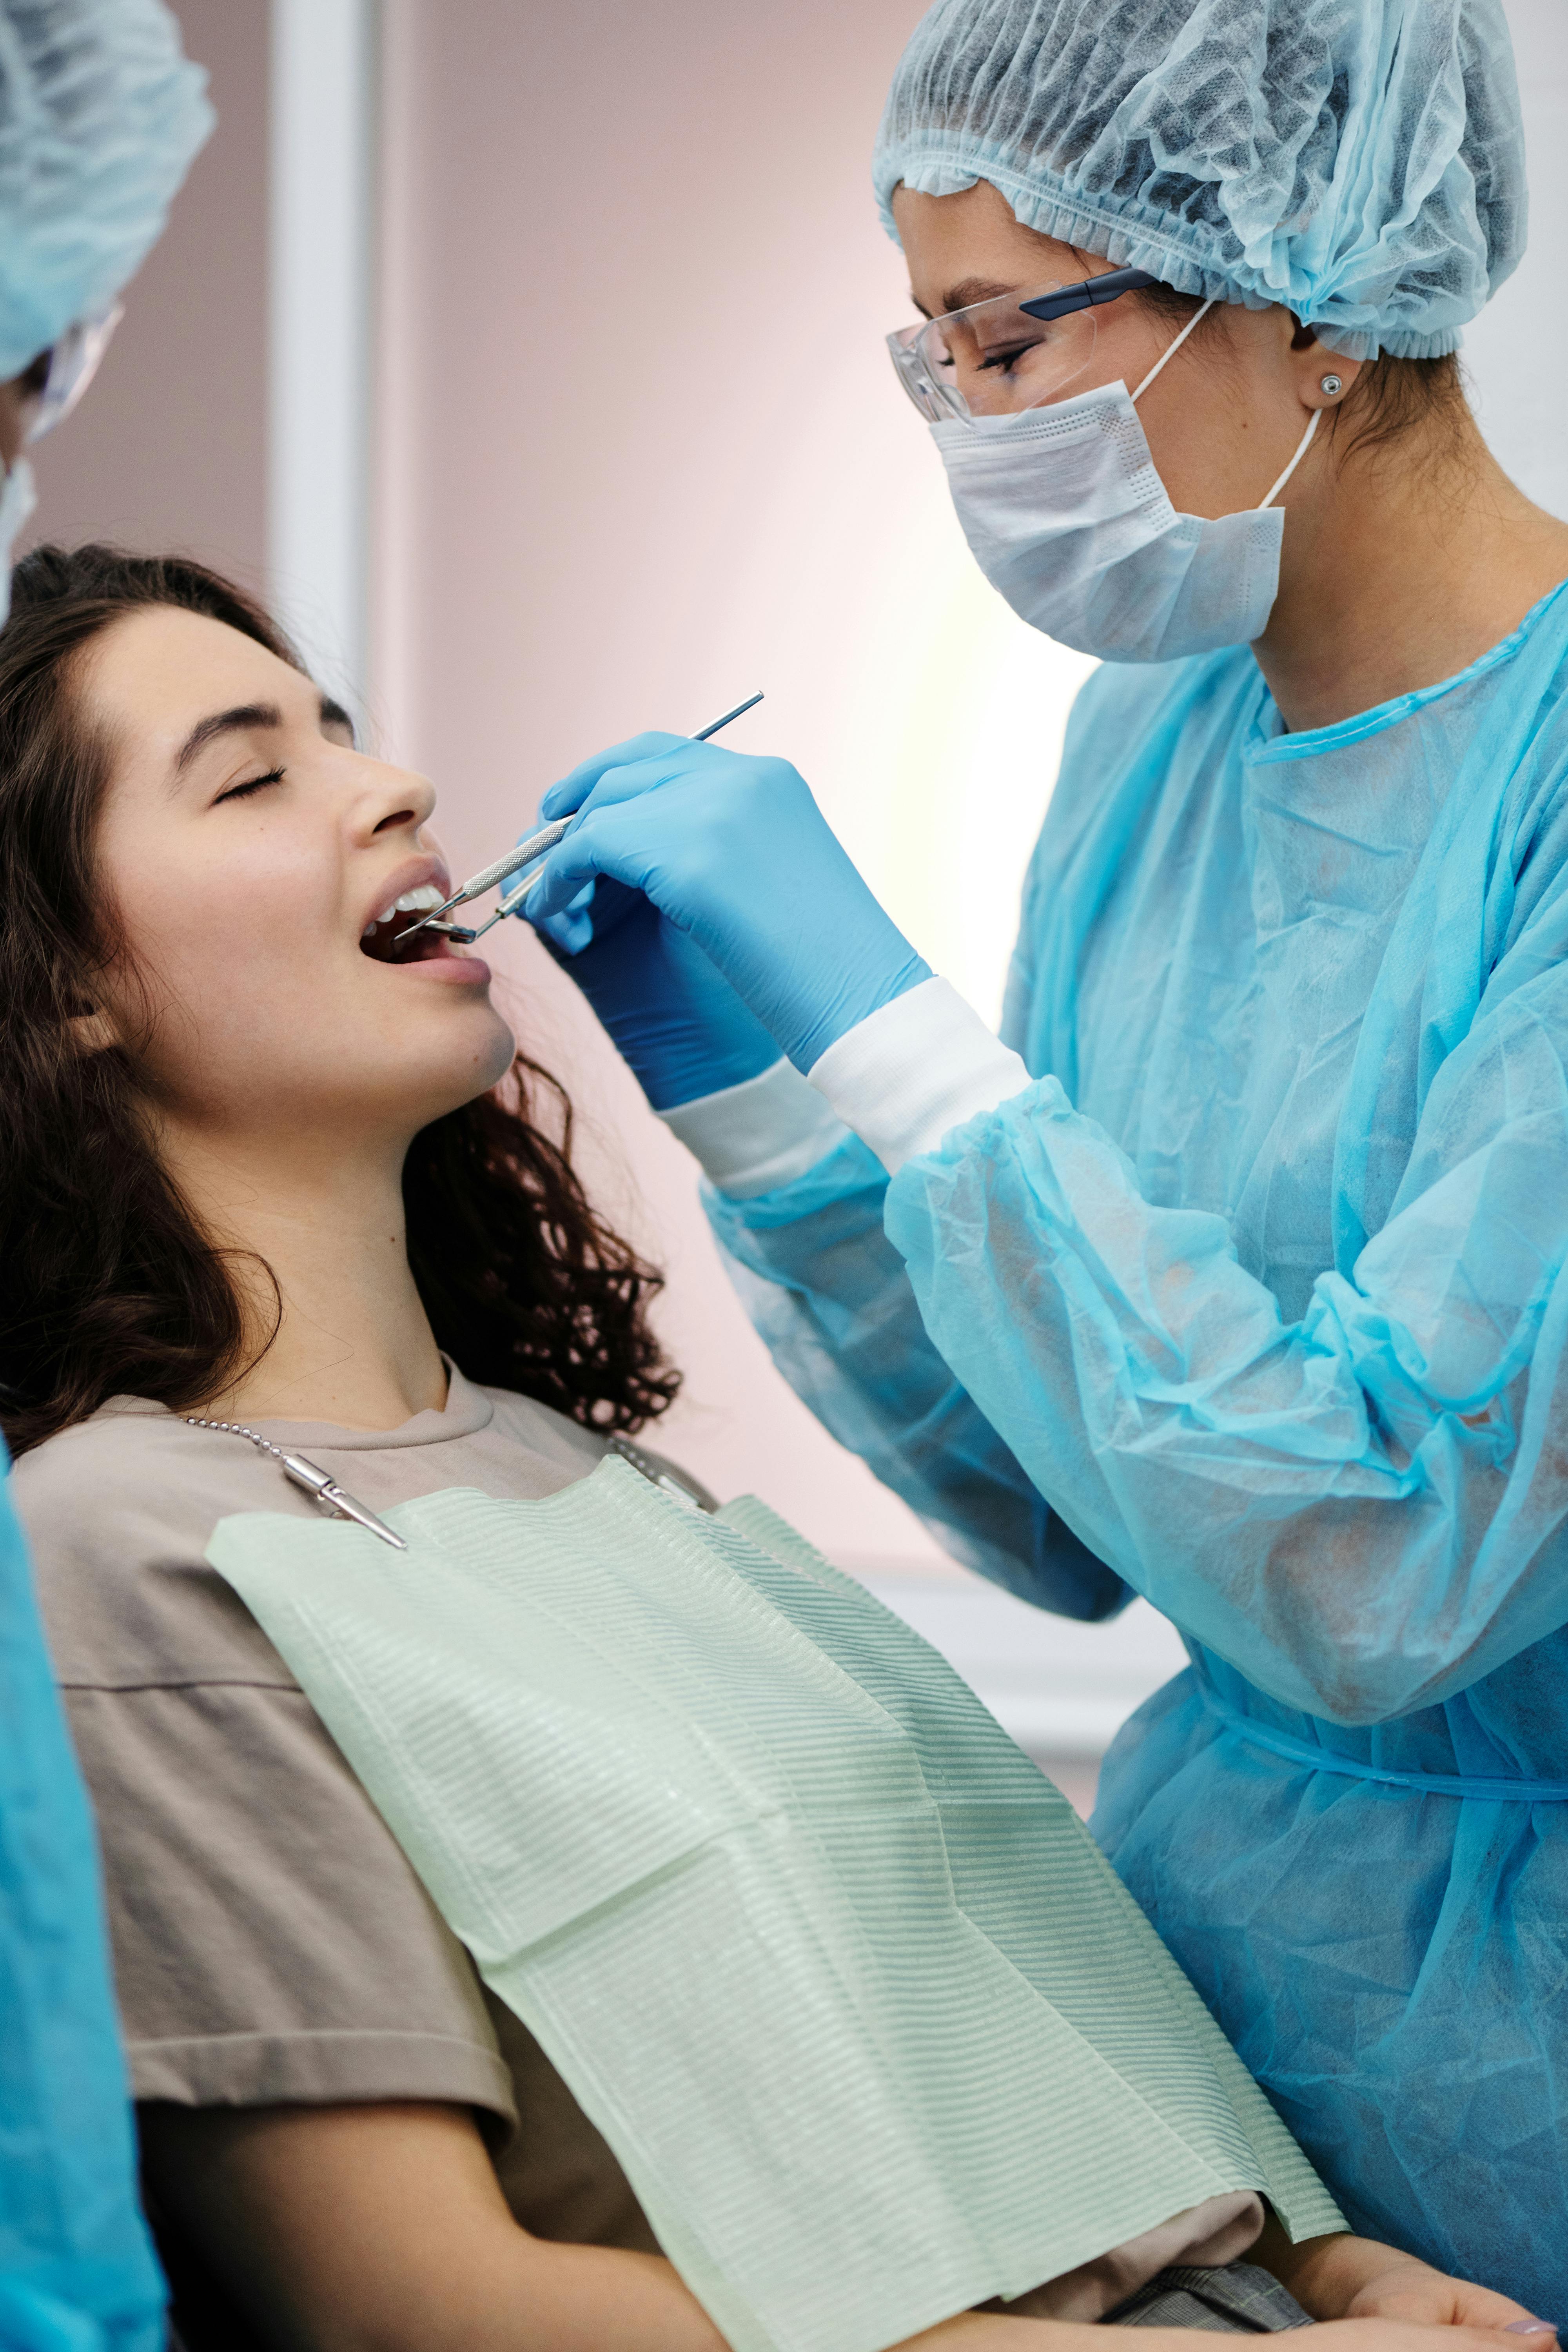 What Is Pediatric Dentistry Also Known As?